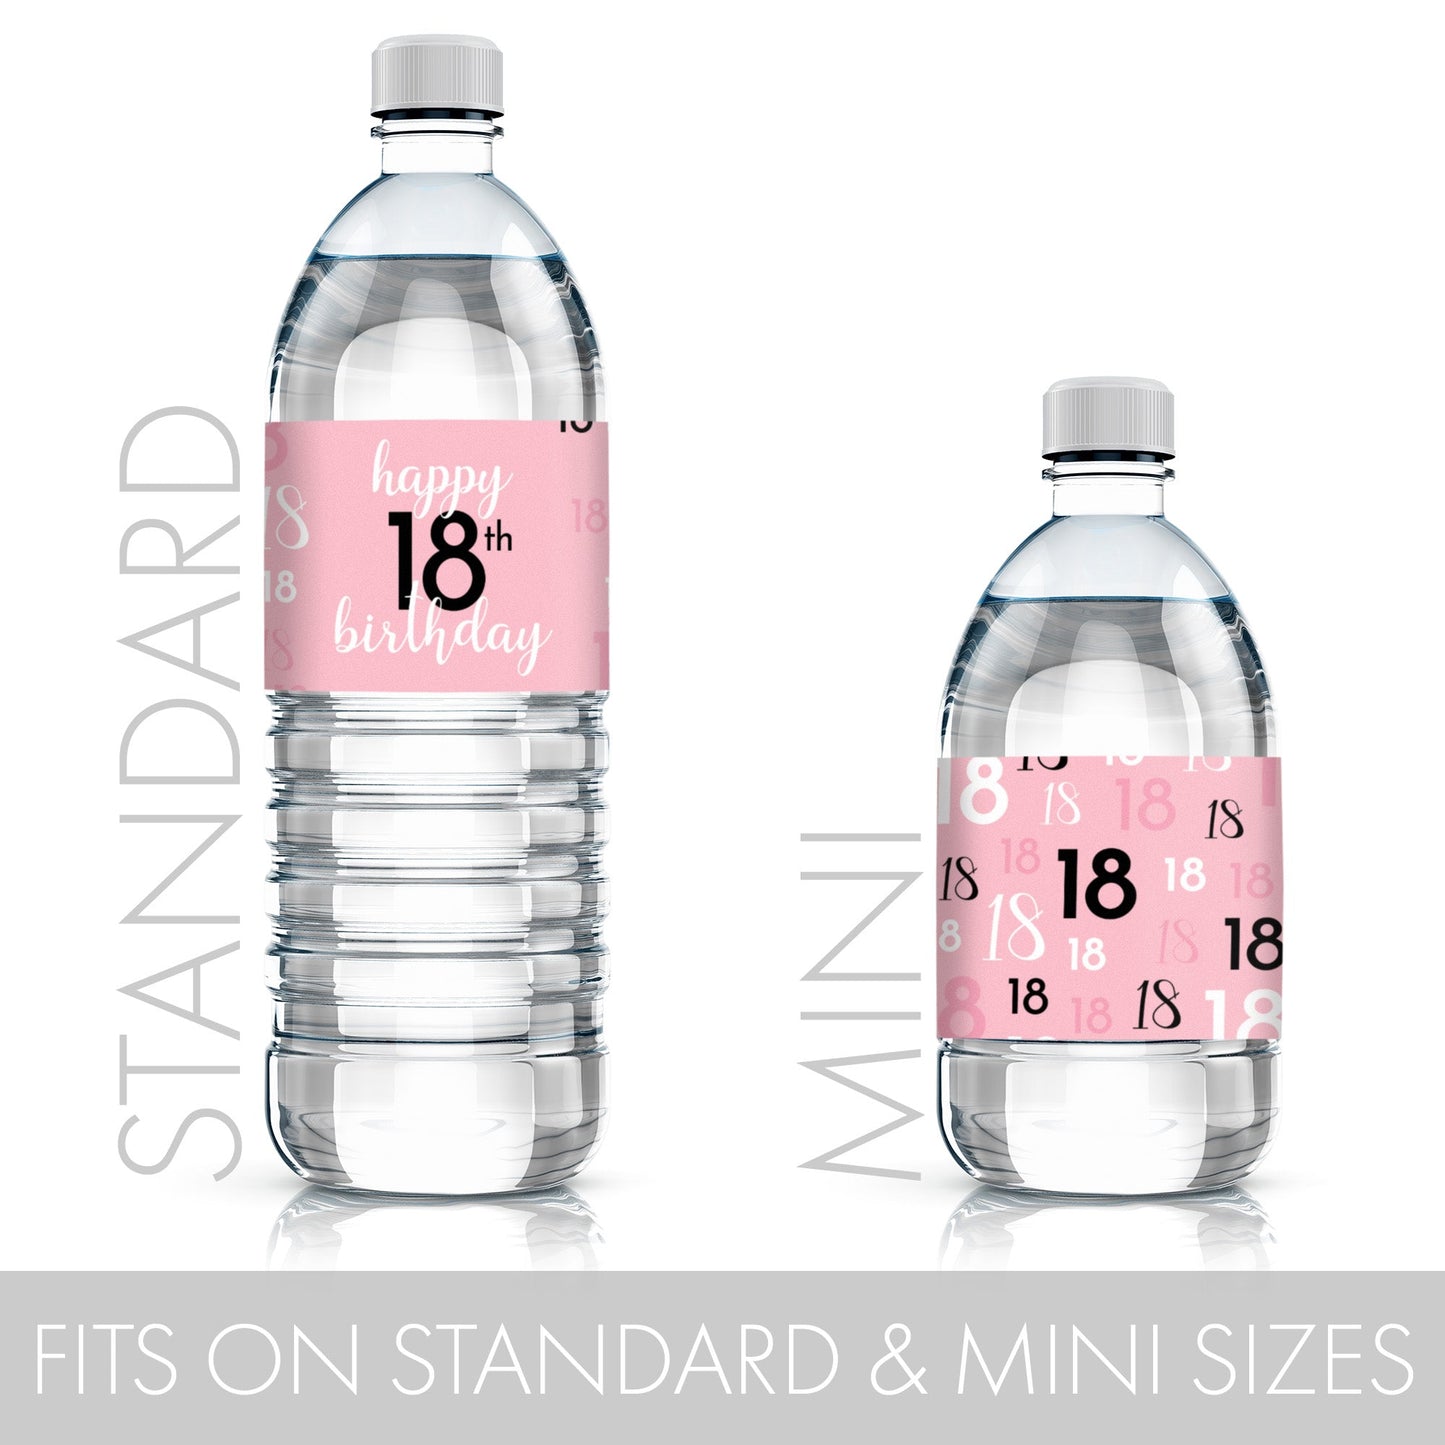 Celebrate in style with pink and black water bottle labels for your 18th birthday